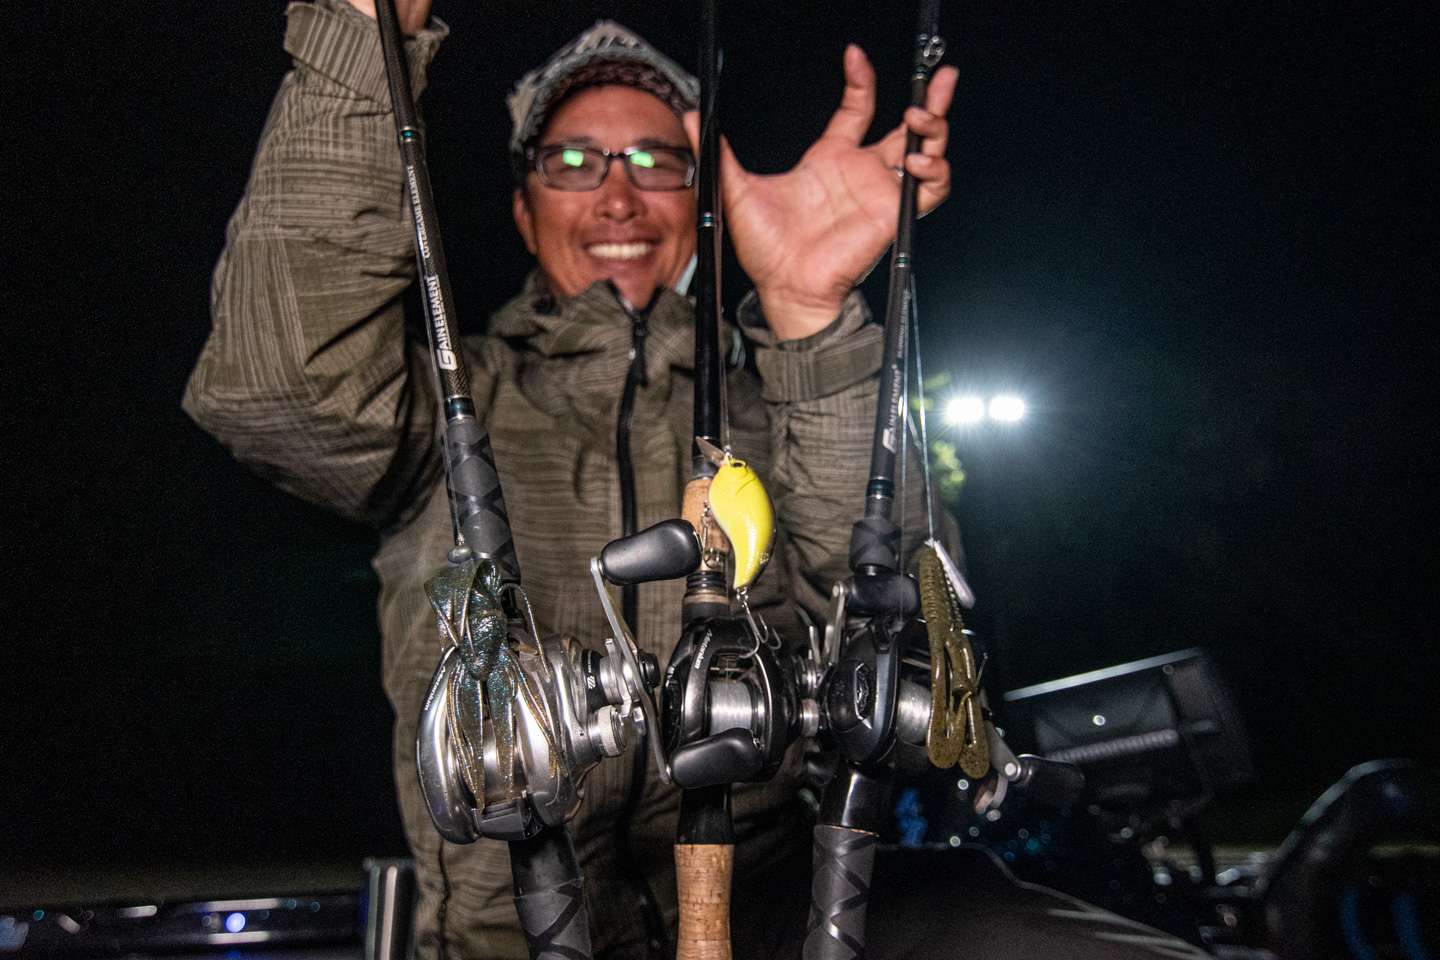 <b>Matsayumi Matsushita (6th, 39-9) </b><br>
The 38-year-old resident of Tokoname, Japan, clinched a Bassmaster Elite Series invitation by finishing 6th at Grand Lake and 2nd in the Opens overall points race. Matsushita relied on three main lures fished around brushpiles and boat docks. They were a chartreuse Deps Evoke 2.0 crankbait, a 4-inch Deps Barbute creature bait, free-rigged with a 3/8-ounce weight and a green pumpkin/blue Jackall Lures drift crab on a 3/16-ounce football head jig.
